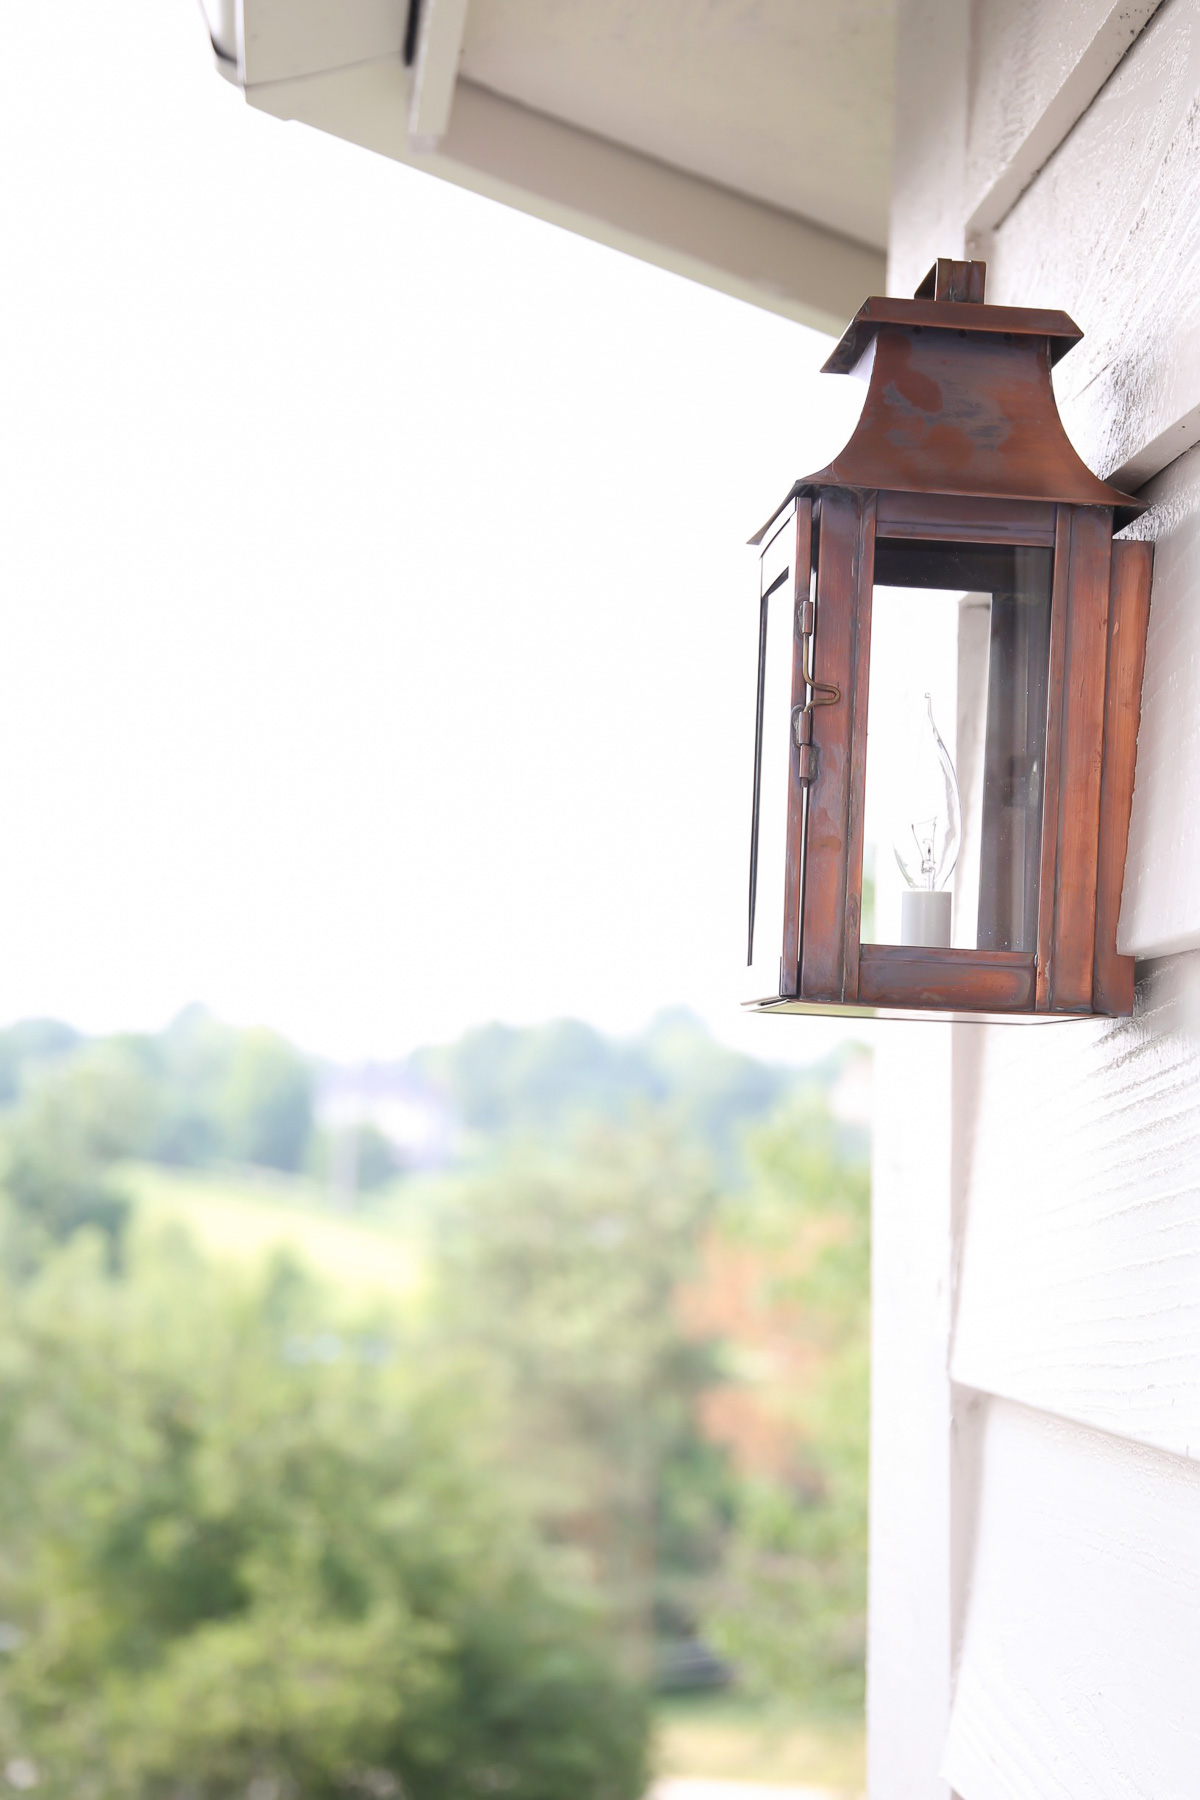 A lantern providing outdoor lighting on the side of a house.